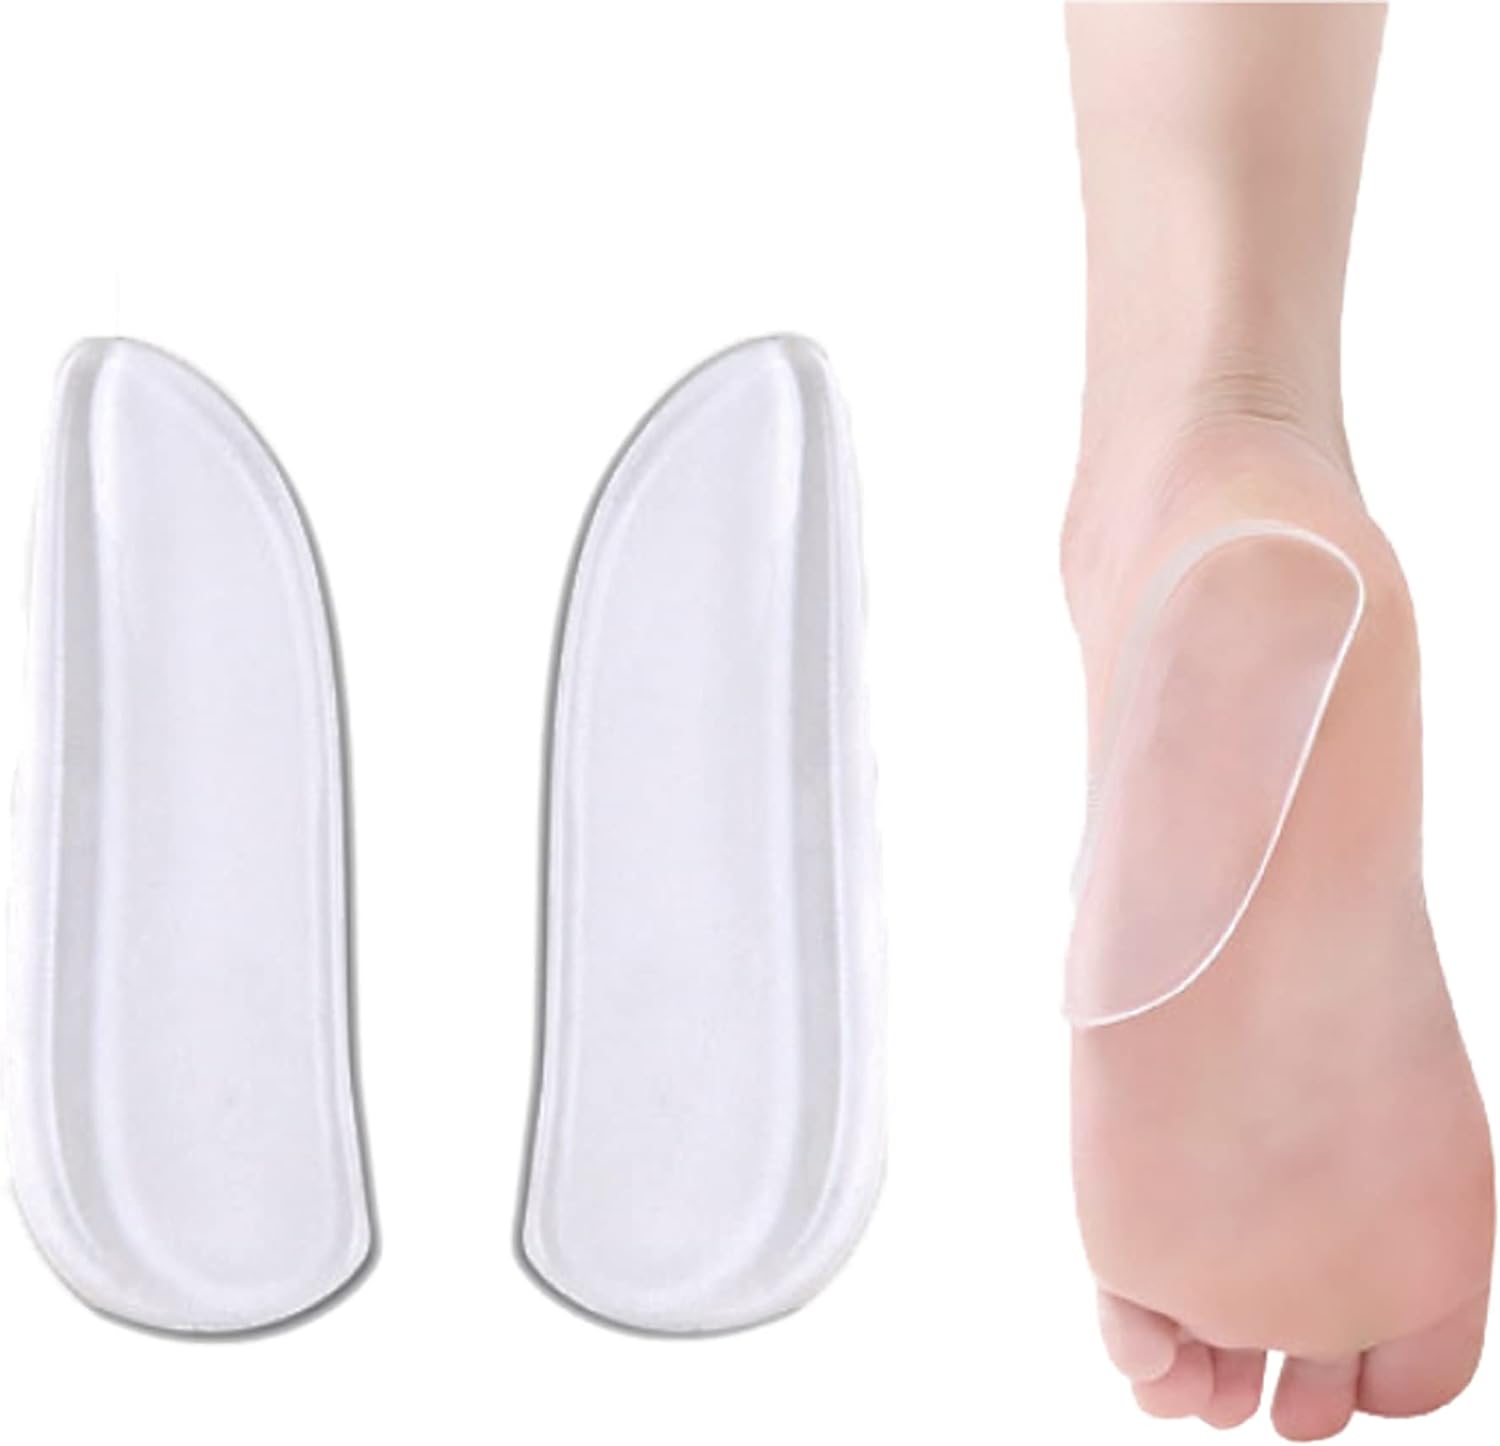 MARS WELLNESS Medial  Lateral Heel Wedge Silicone 2 Pairs - Universal - Adhesive Shoe Insert for Knock Knee Pain, Bow Legs, Foot Alignment - Pronation, Supination